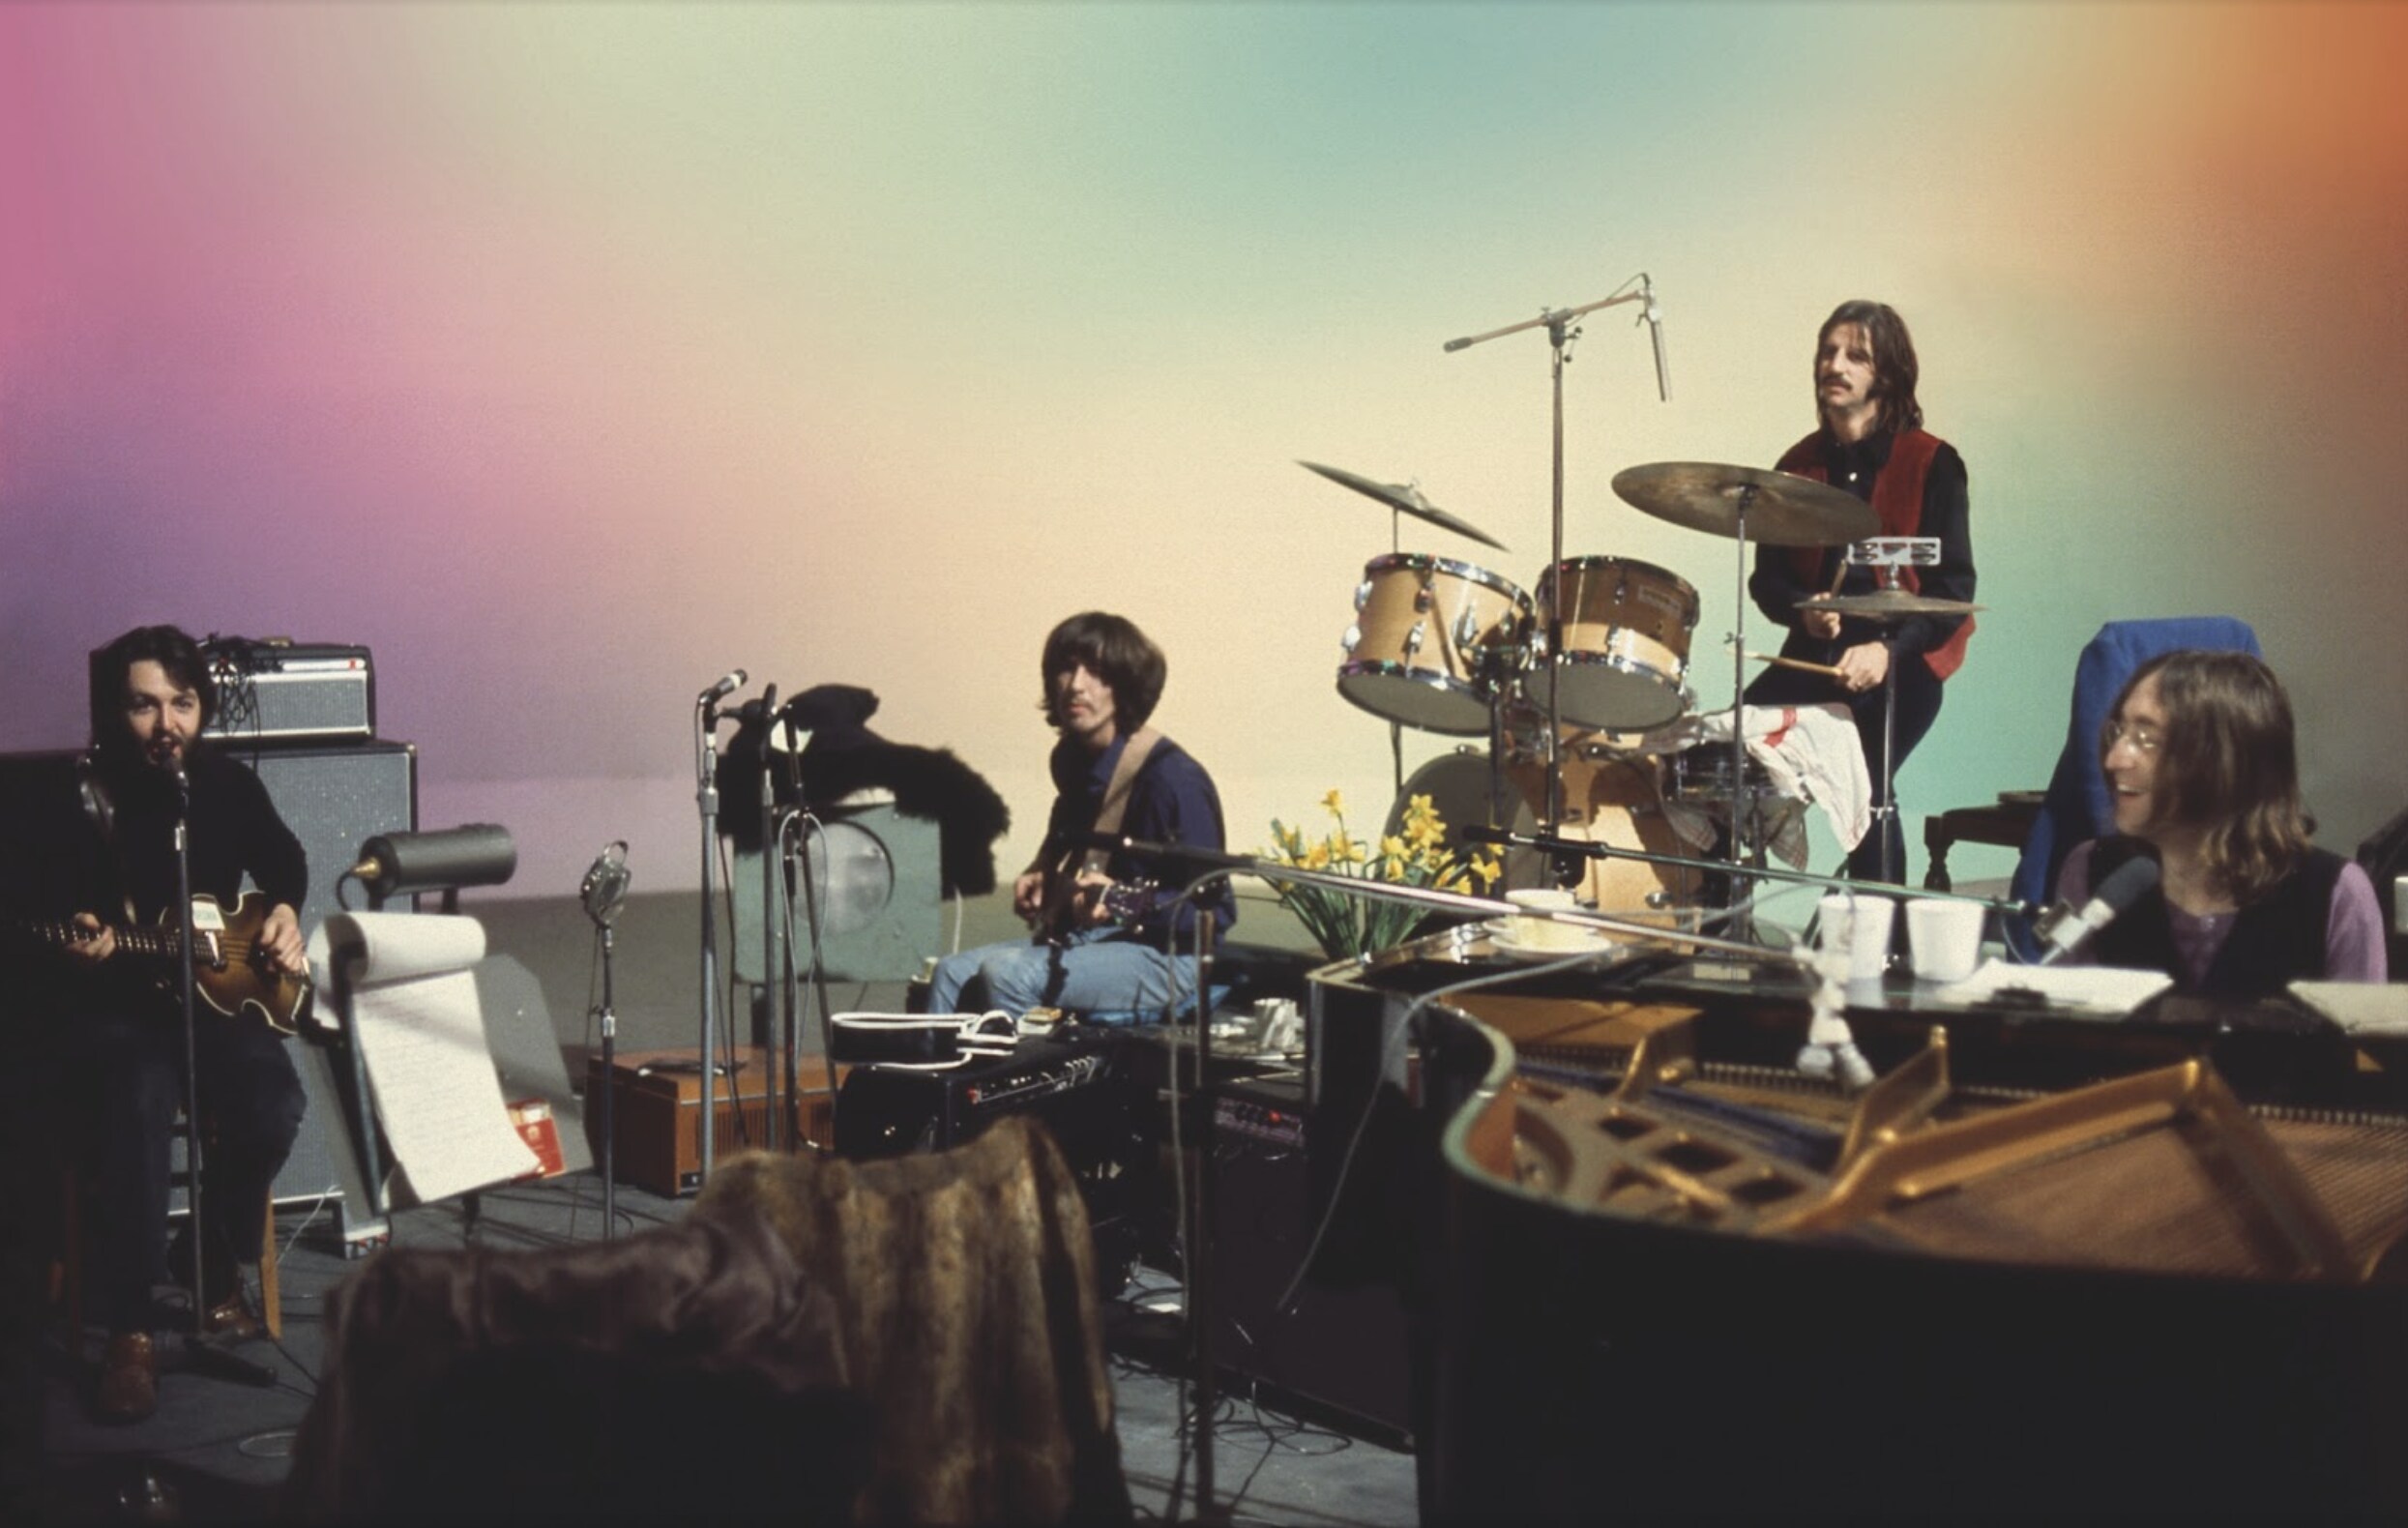 The Beatles perform on stage, each one playing a different instrument in front of a colored background 